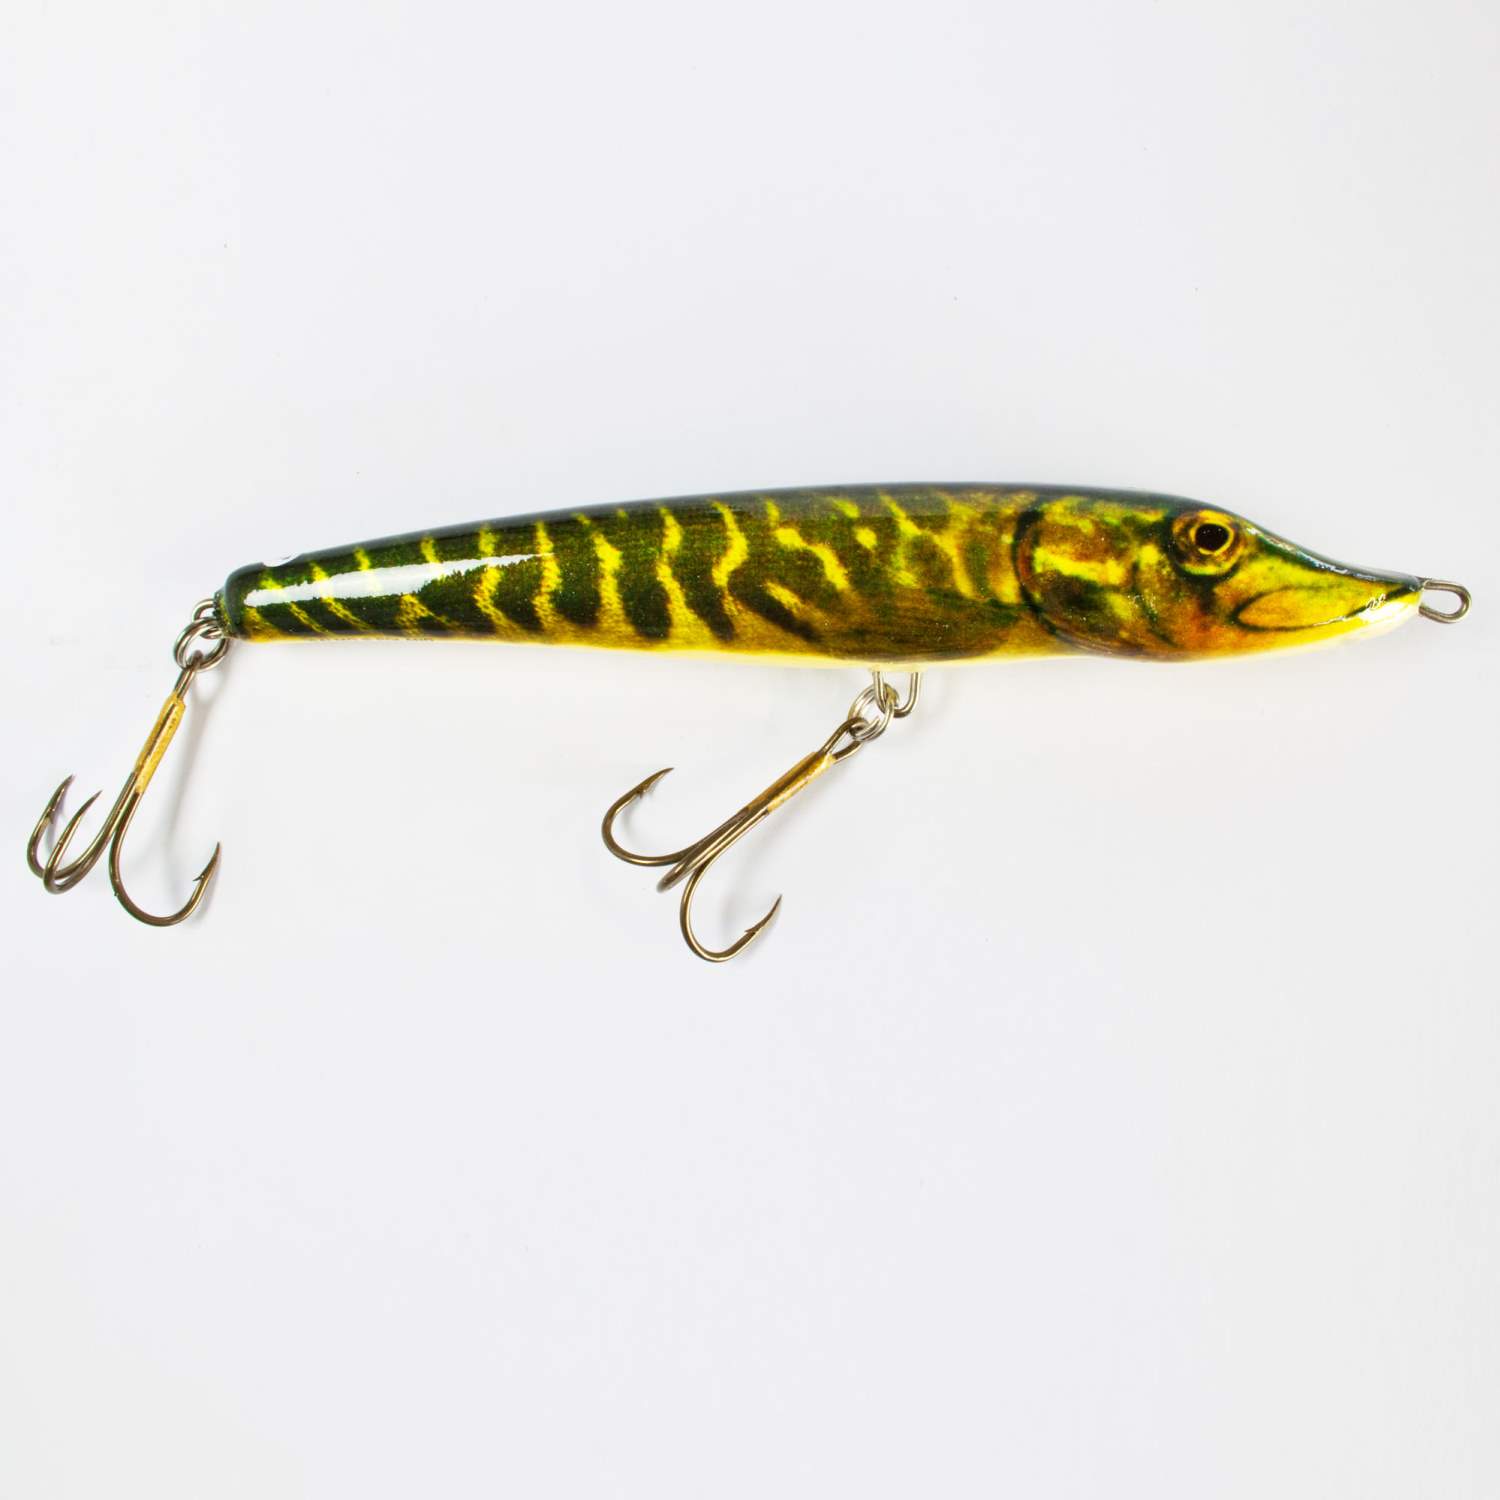 Salmo Jack Sinking 18cm Barred Muskie Limited Edition